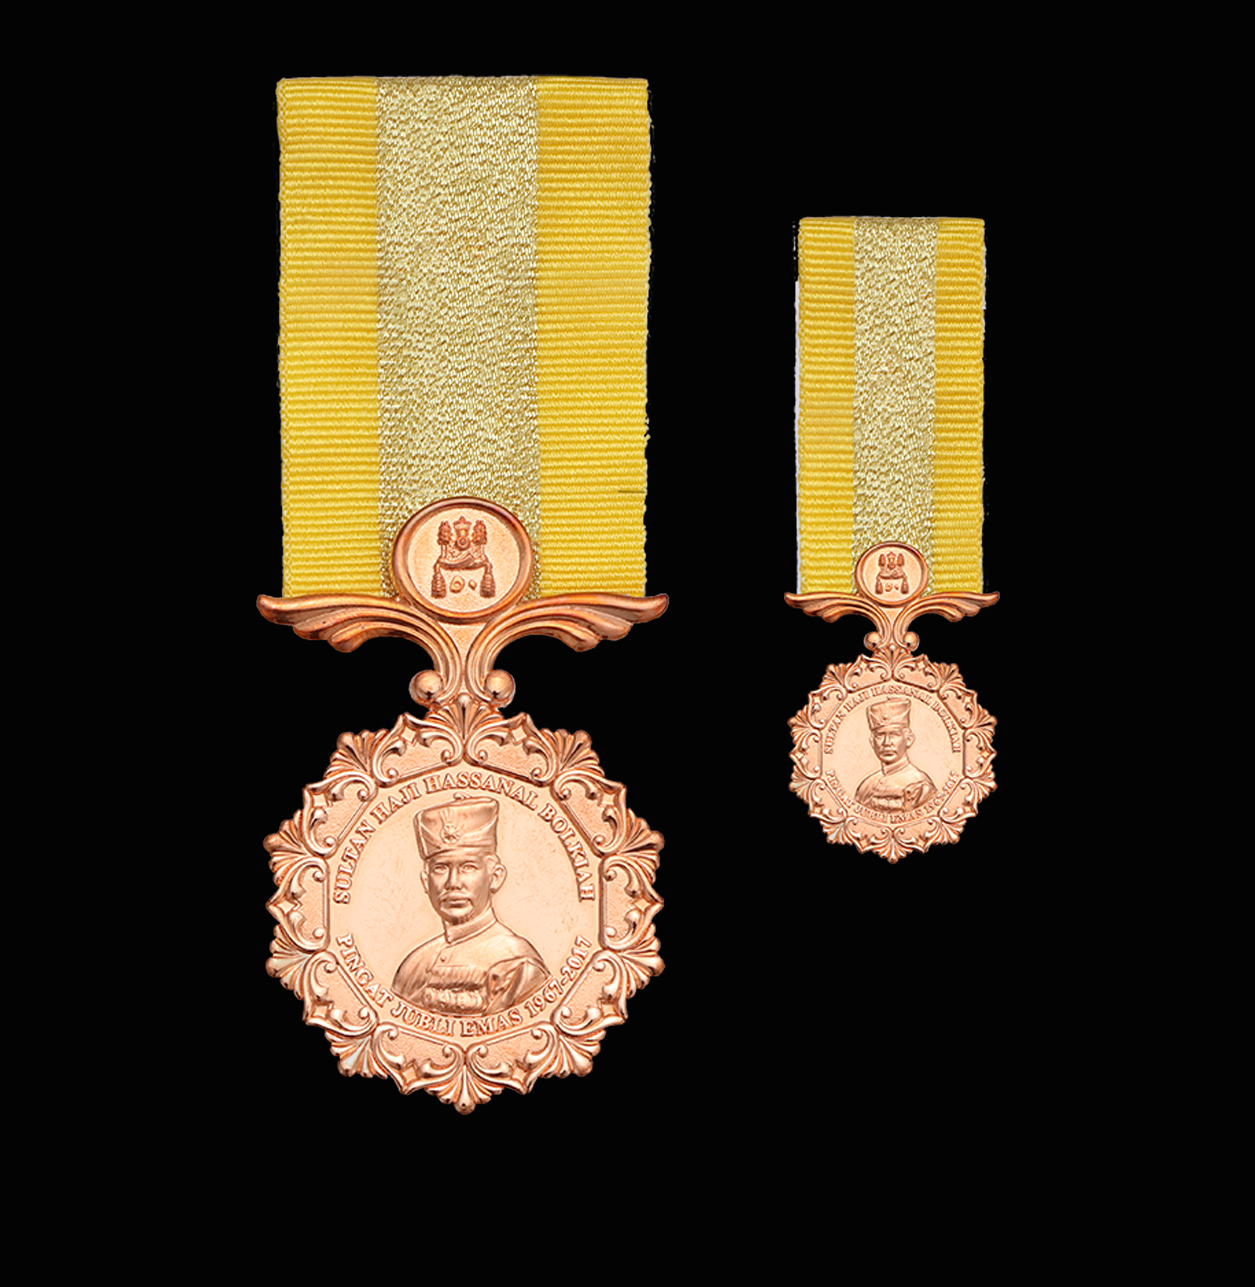 Golden Jubilee Medal of His Majesty Sultan